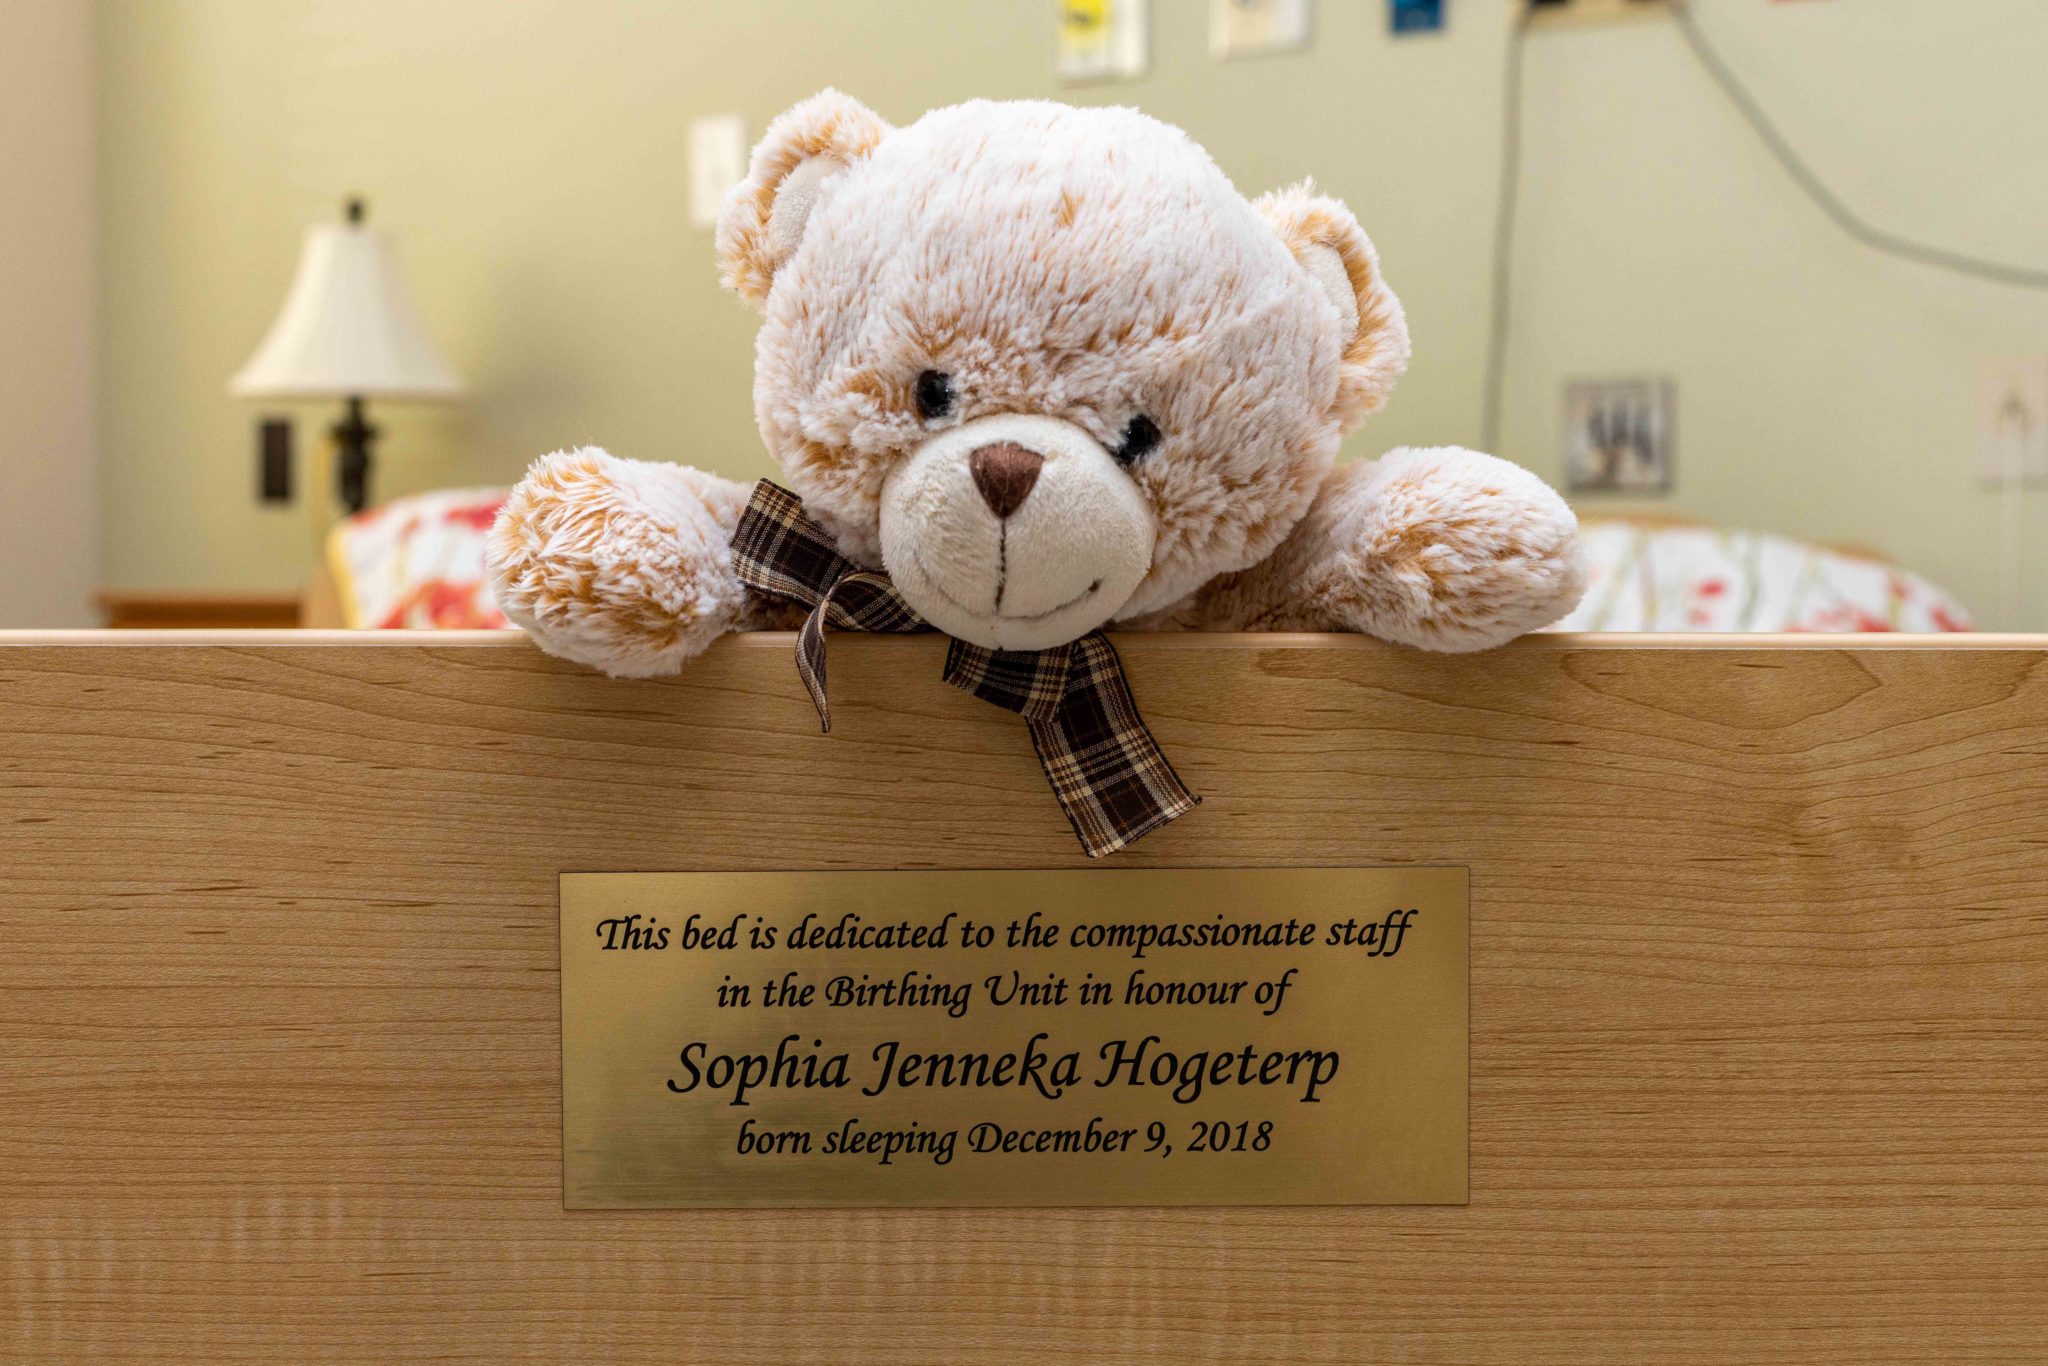 A teddy bear sits above a plaque on the footboard of the new bed in the family care suite that is dedicated to the compassionate staff in the Birthing Unit in loving memory of Sophia Jenneka Hogeterp, born sleeping on December 9, 2018.